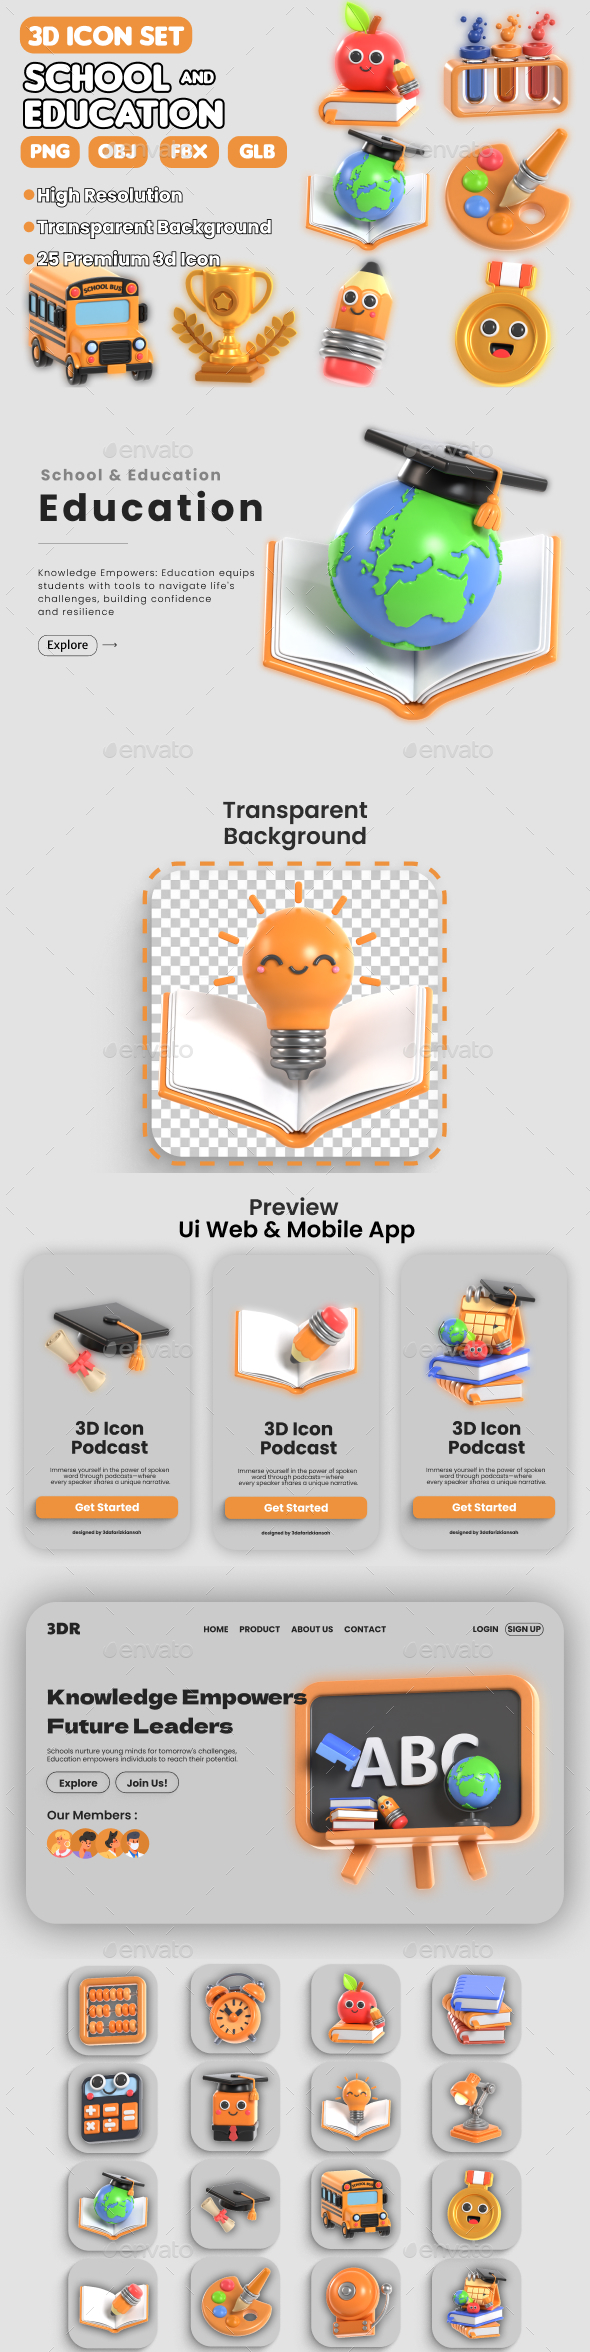 [DOWNLOAD]3D School and Education